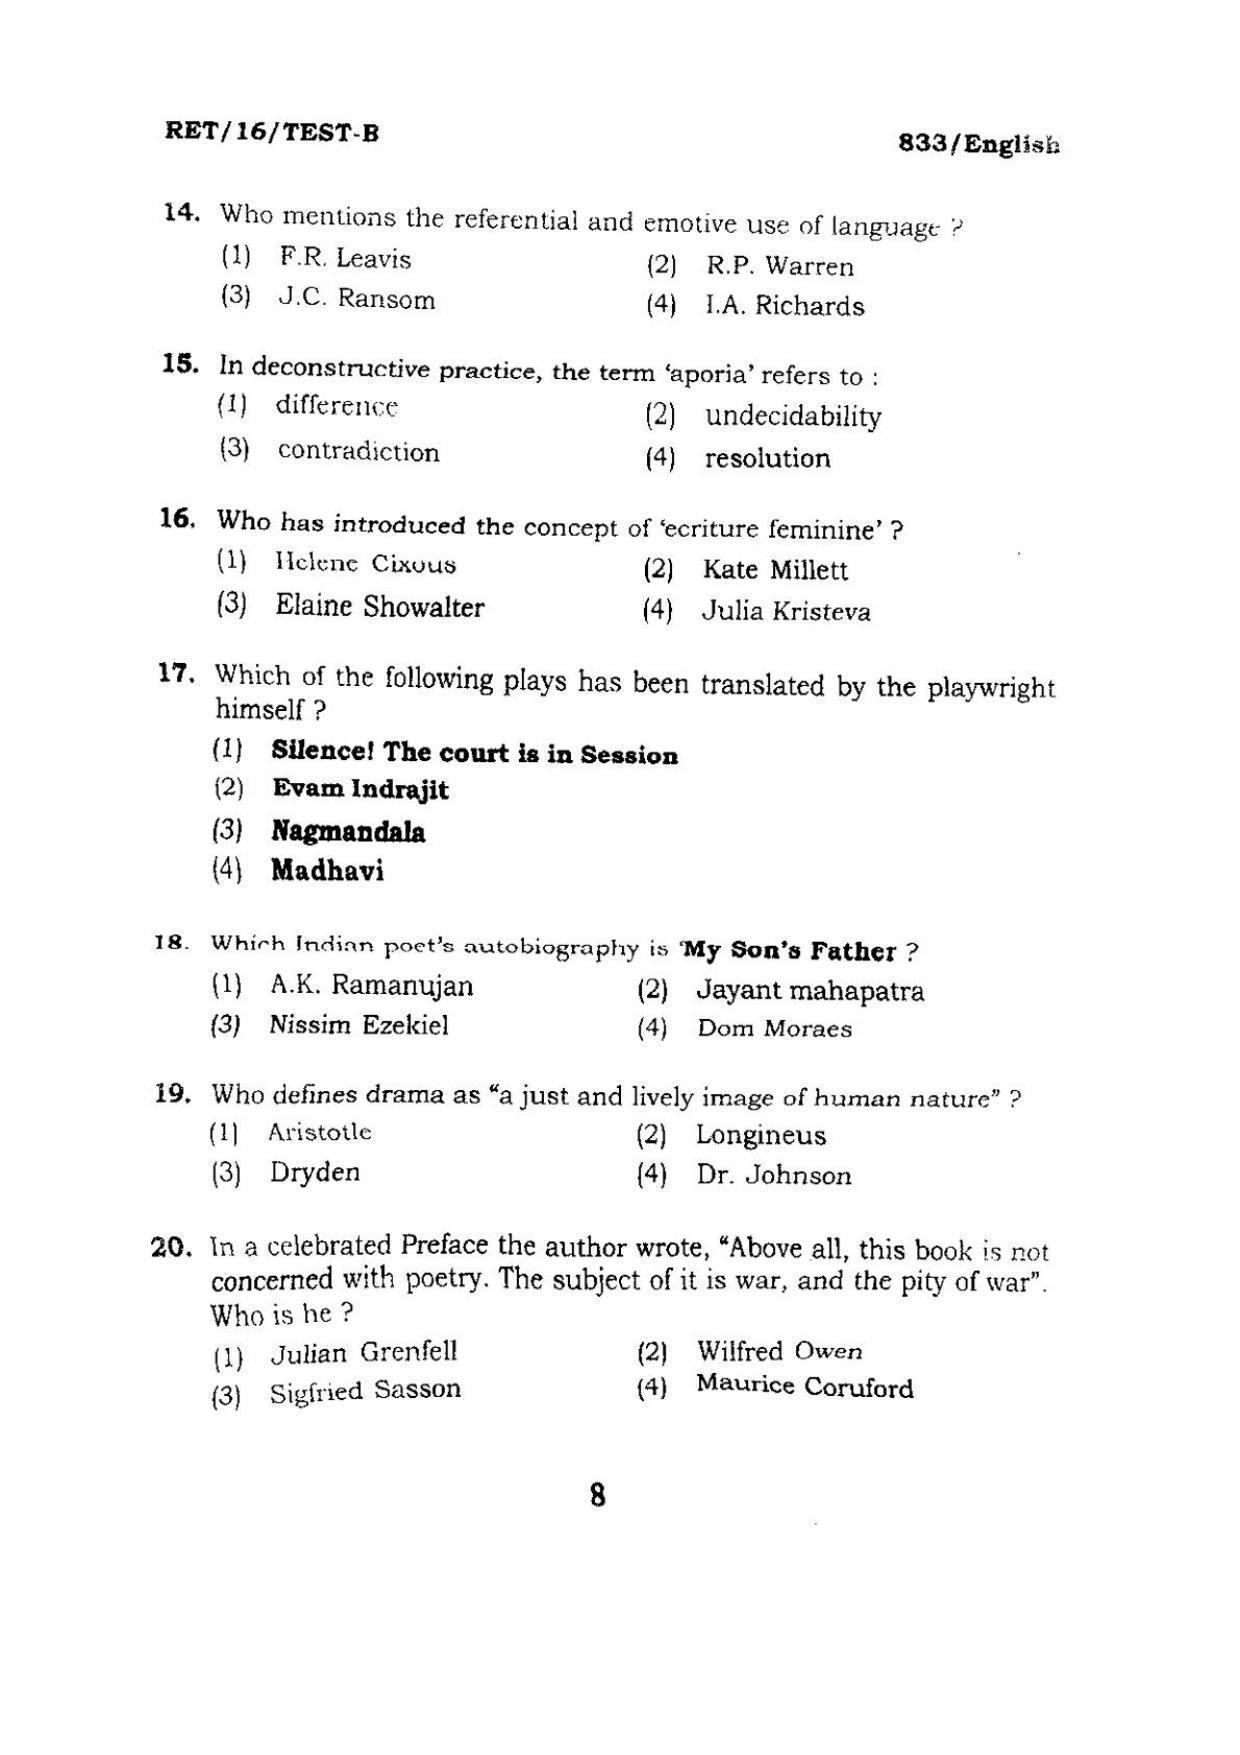 BHU RET ENGLISH 2016 Question Paper - Page 8